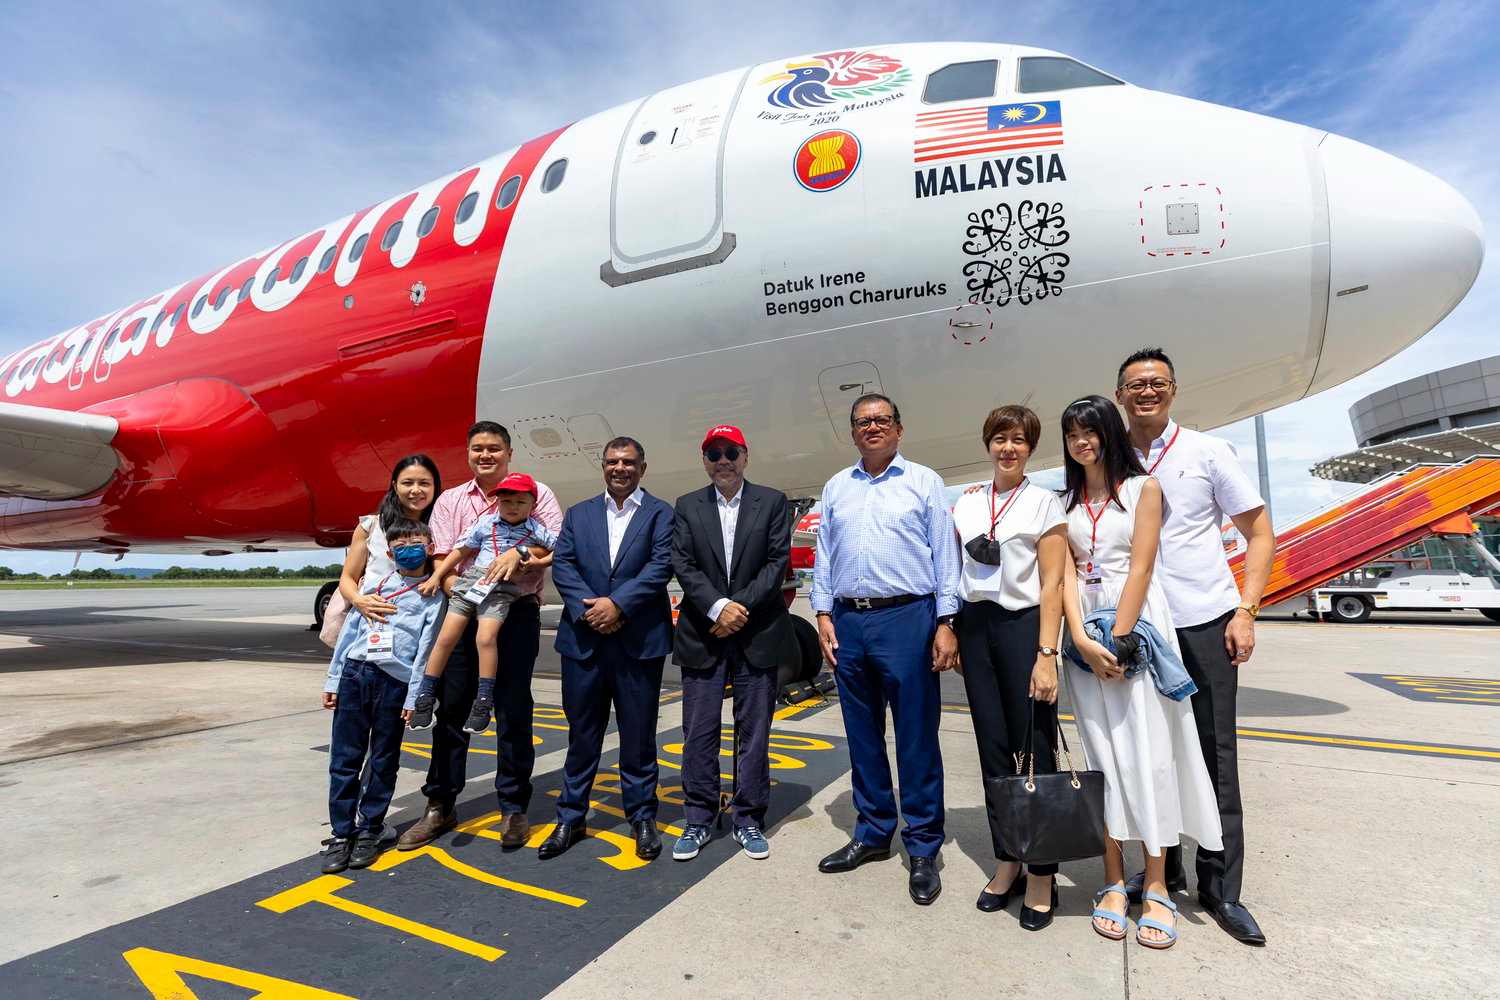 Tan Sri Tony Fernandes (third from left), CEO of Capital A, with Datuk Kamarudin Meranun, Executive Chairman of Capital A and YB Datuk Joniston Bangkuai, Assistant Minister of Tourism, Culture and Environment and Chairman of Sabah Tourism Board, with family of the late Datuk Irene Benggon Charuruks. Click to enlarge.